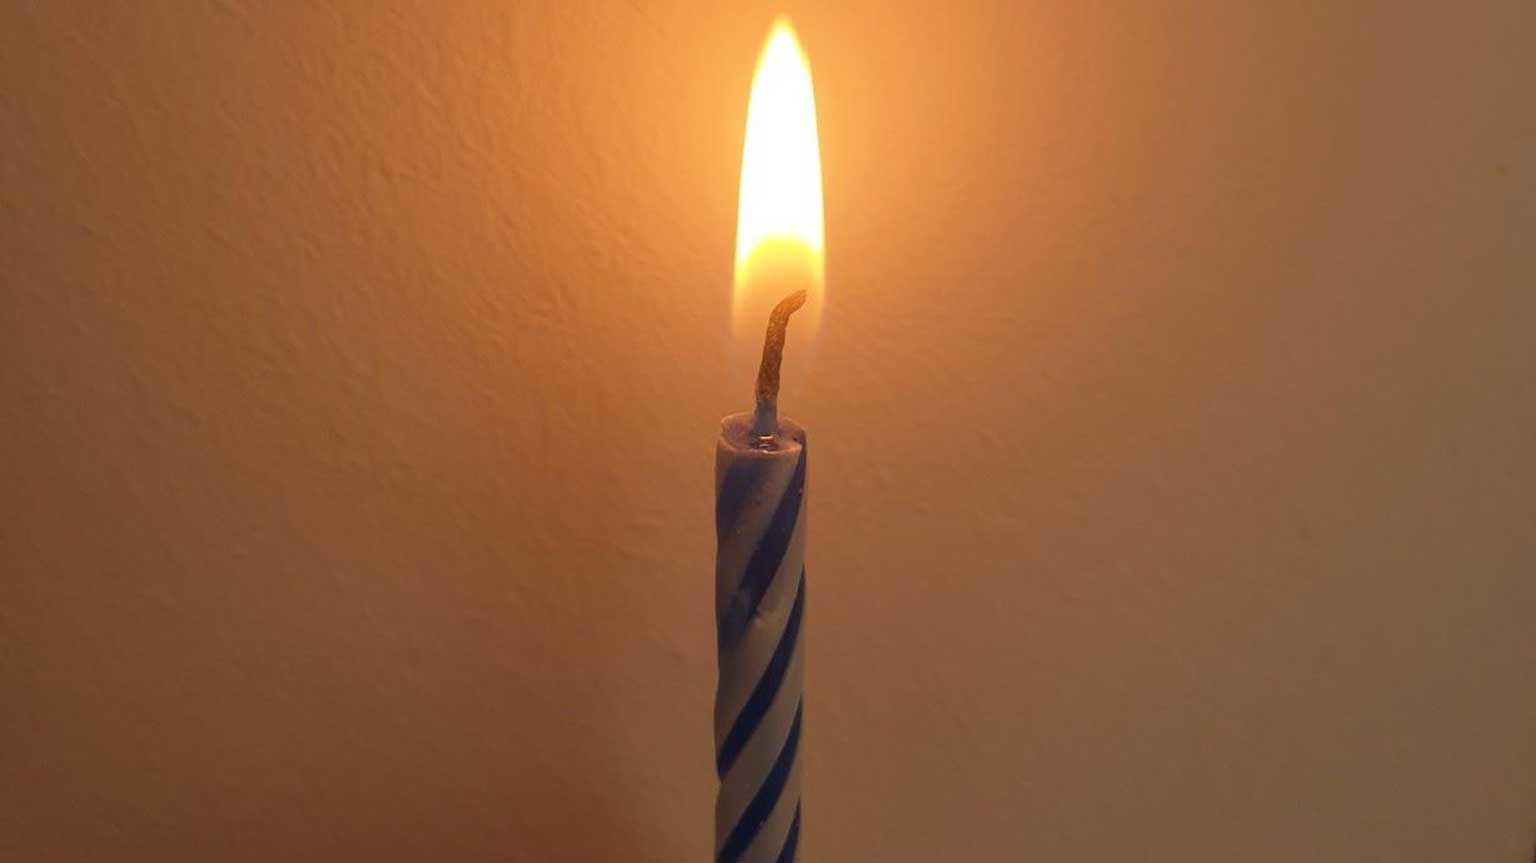 Photo of a candle